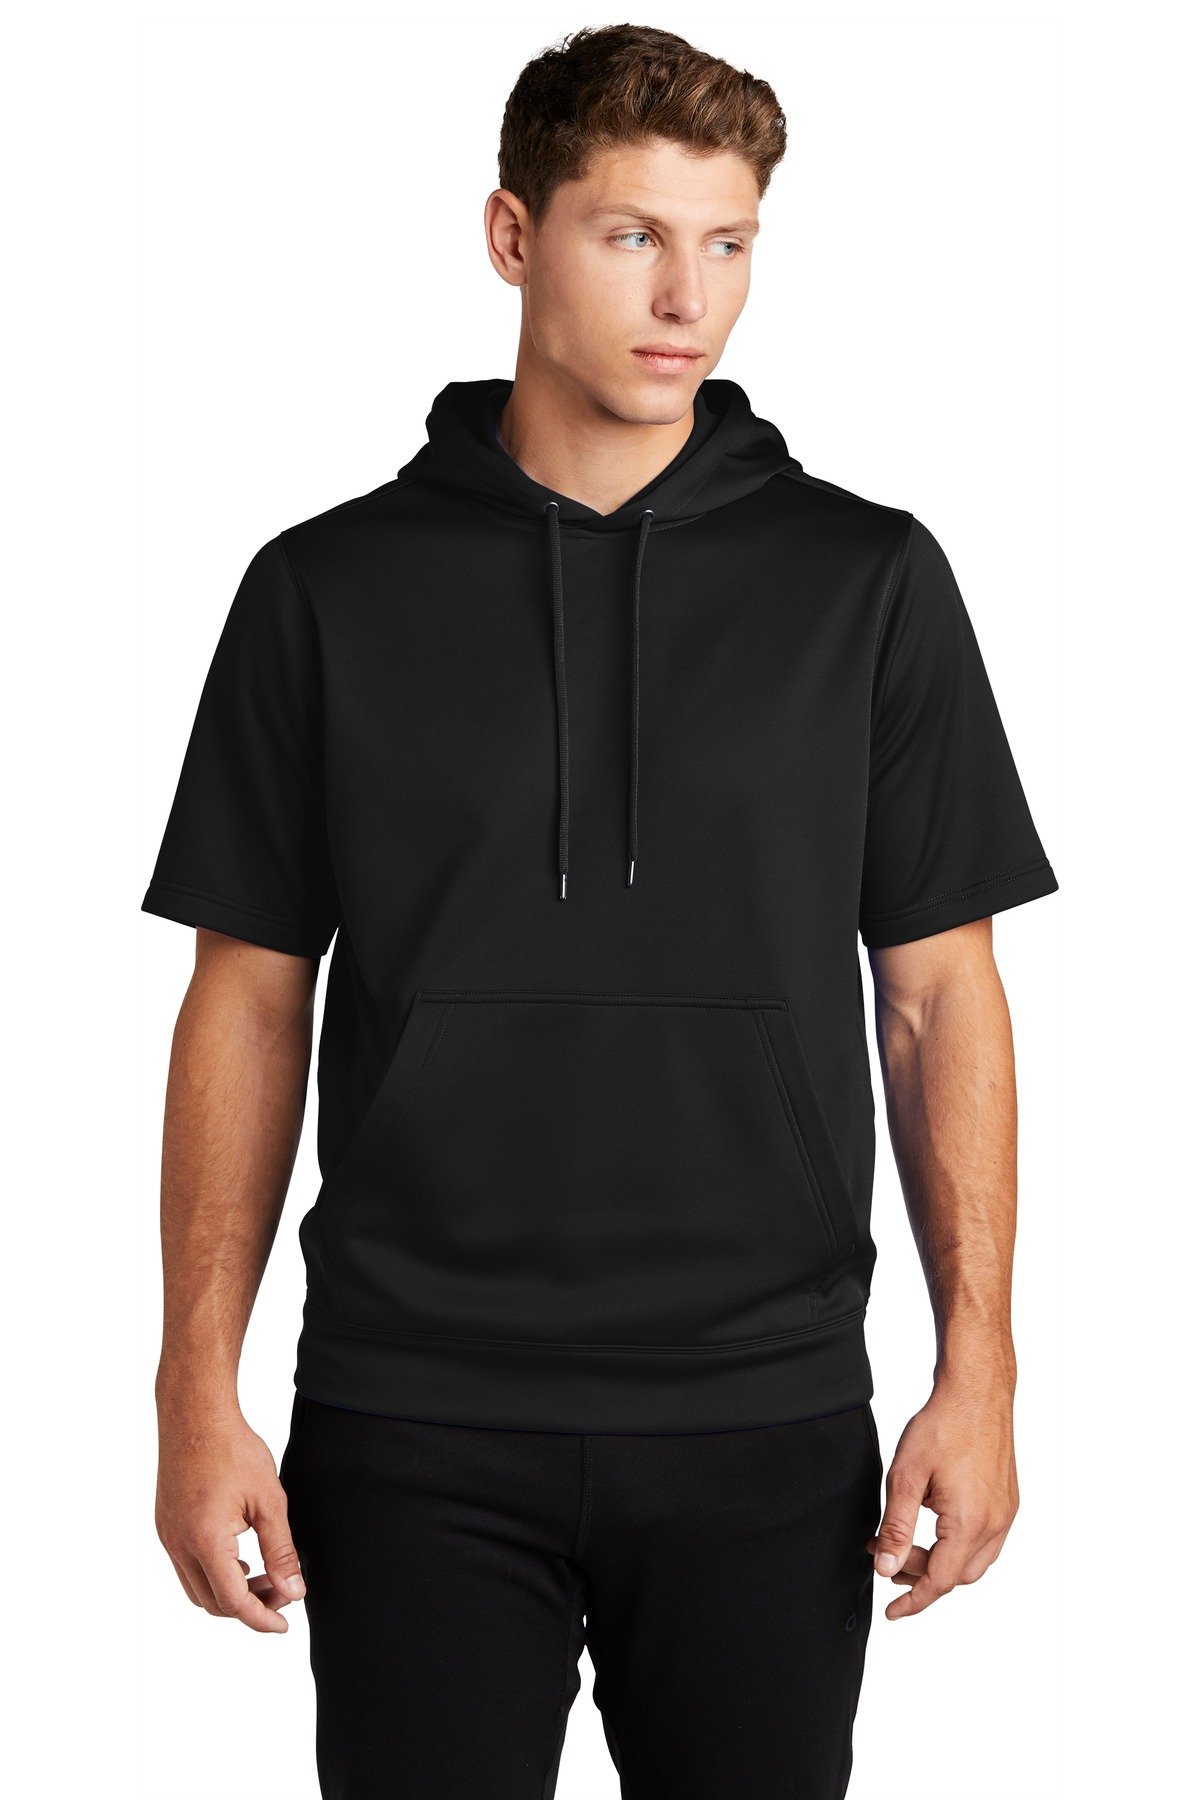 Front view of Sport-Wick ® Fleece Short Sleeve Hooded Pullover